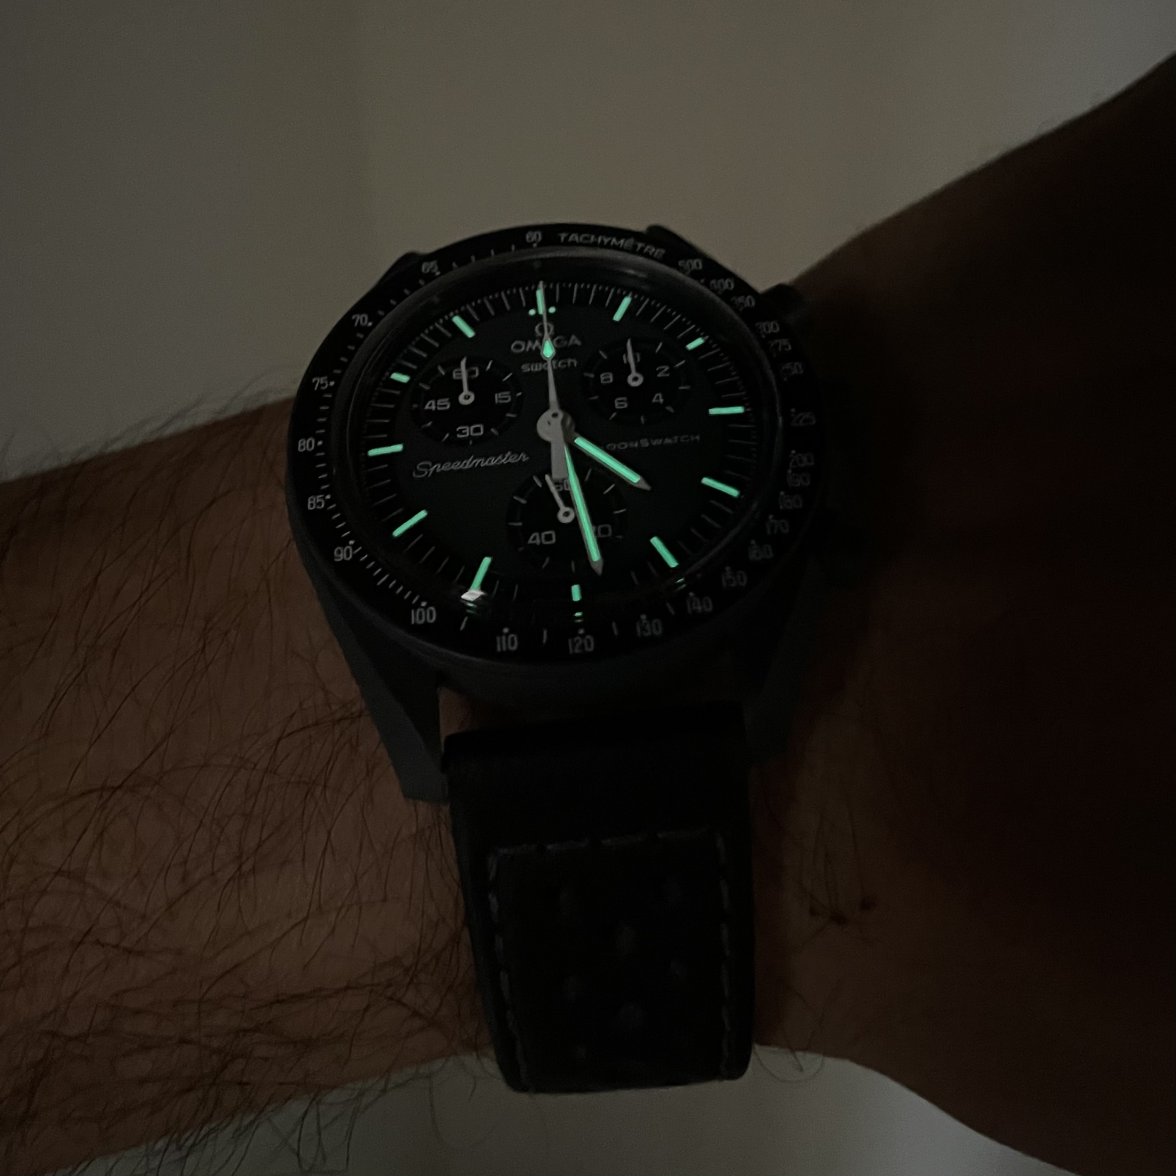 Omega x Swatch - MoonSwatch Only - Pictures Thread! | Page 9 | Omega Forums